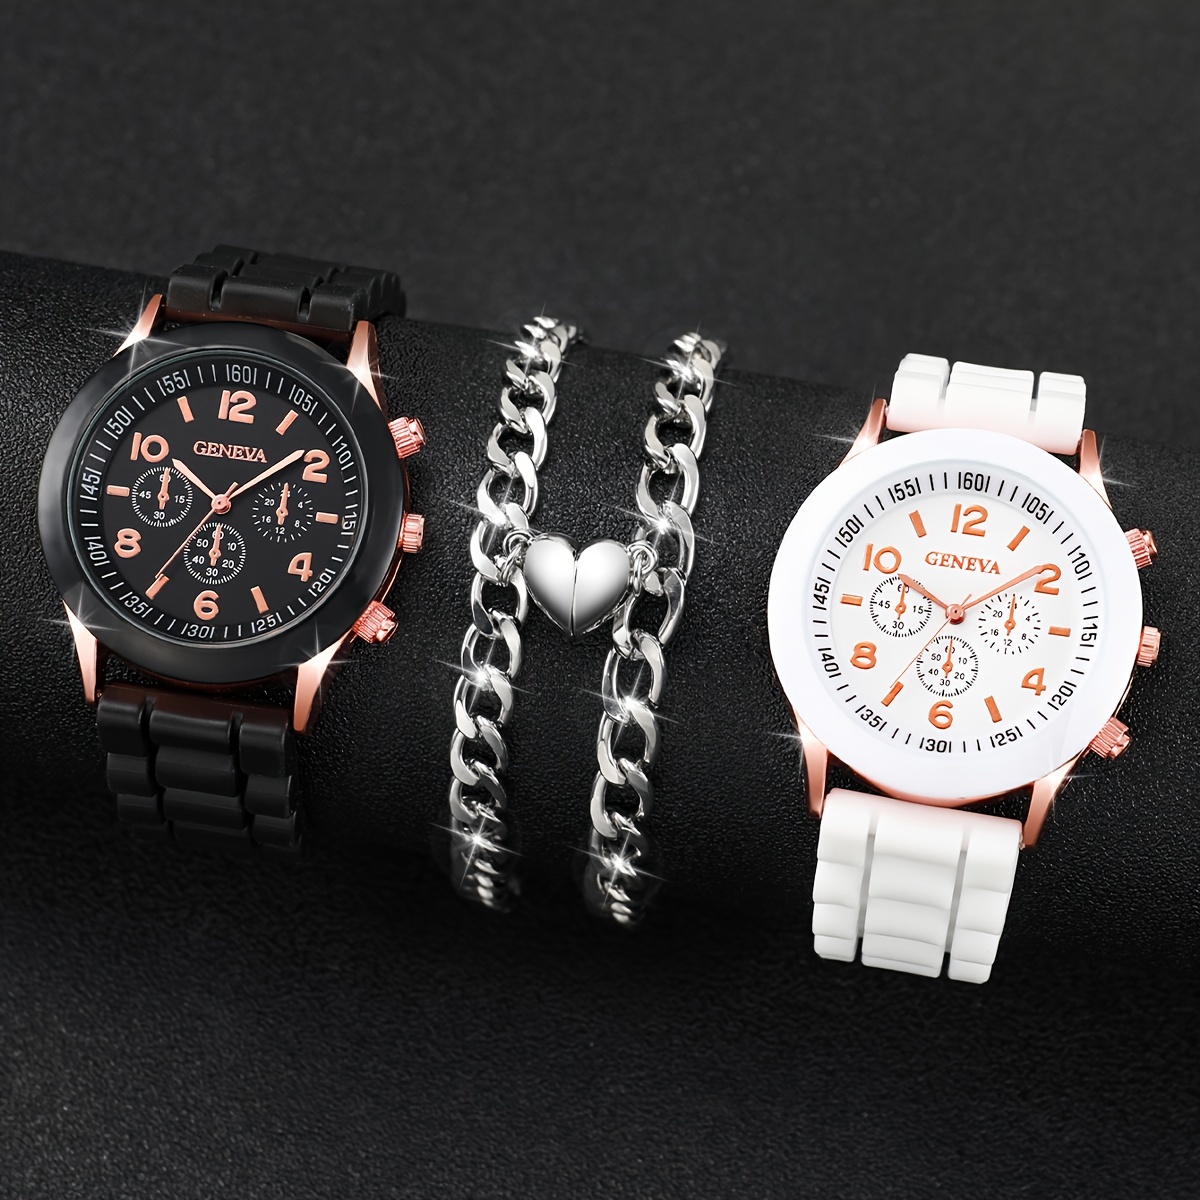 

4pcs/set Casual Fashion Couples Quartz Watch Analog Silicone Wrist Watch & Heart Matching Bracelets, Valentines Gift For Him Her